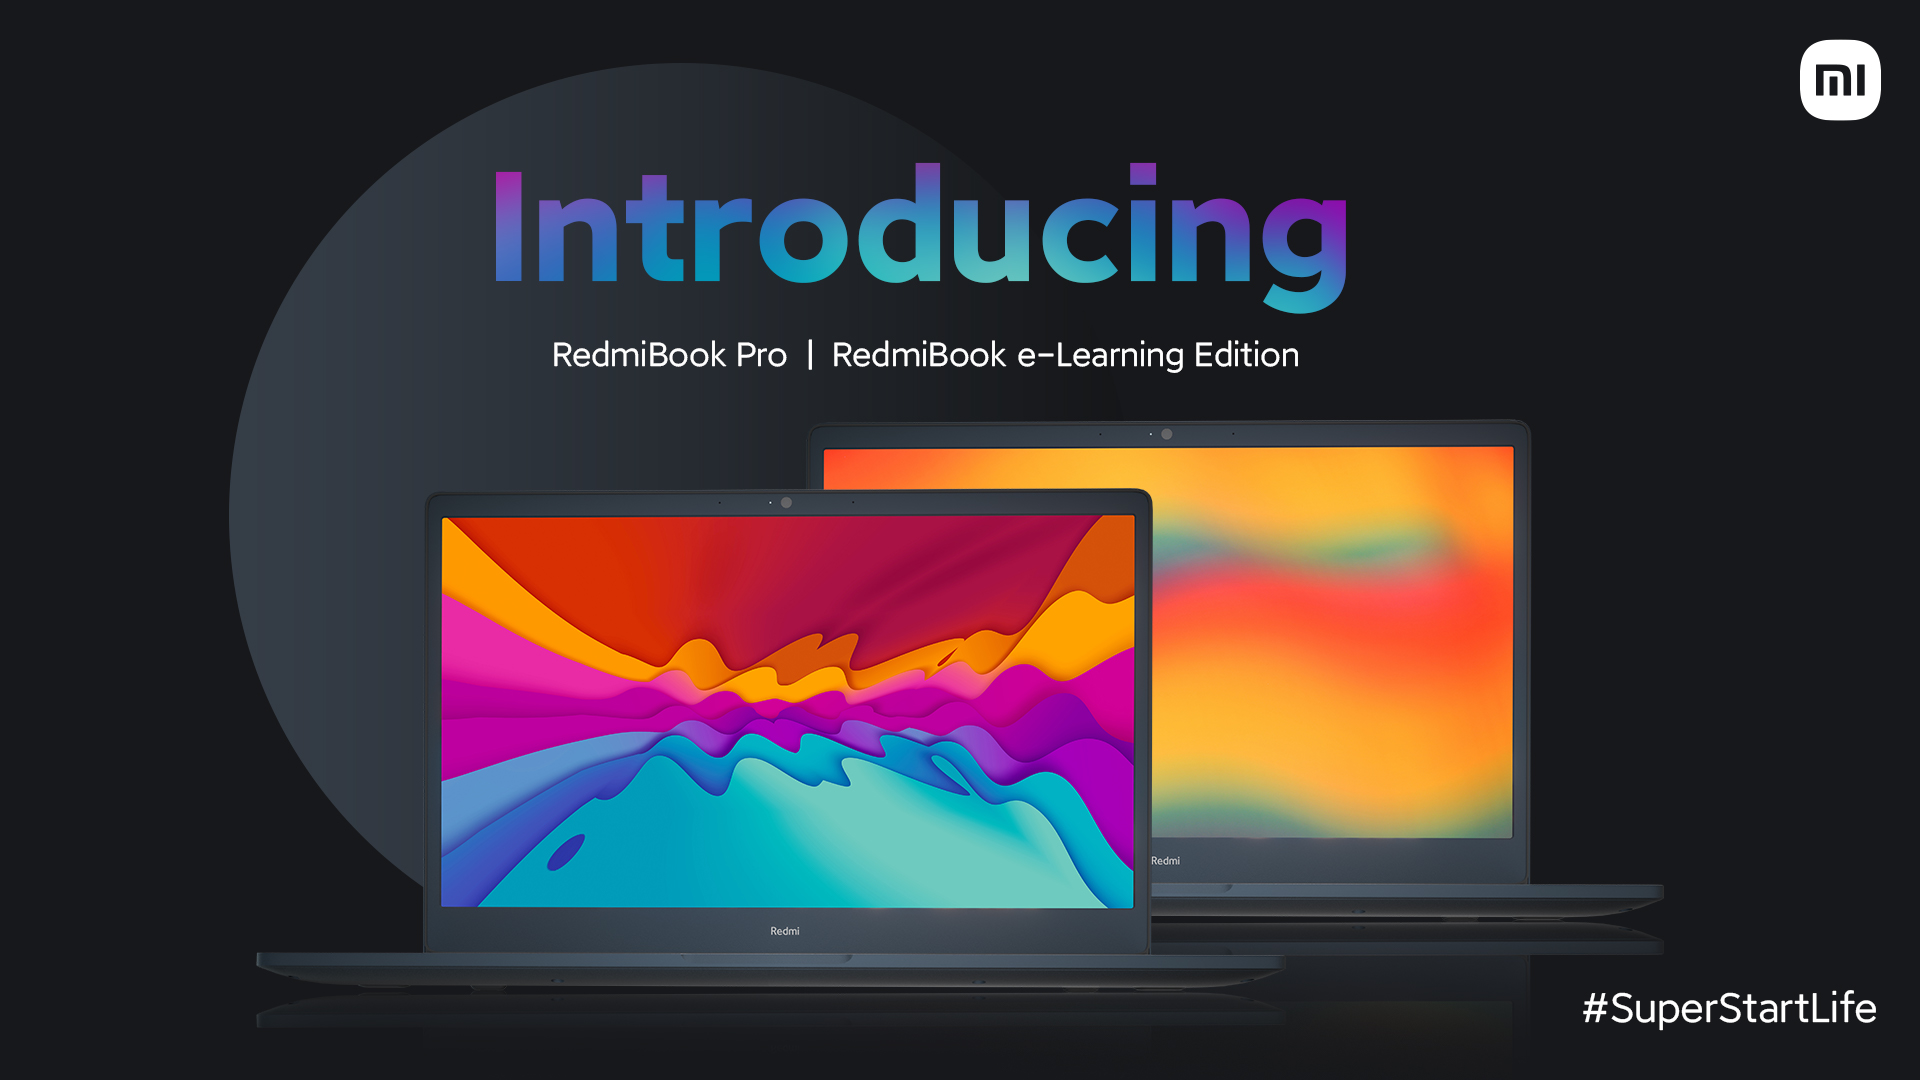 RedmiBook Pro and RedmiBook eLearning Edition